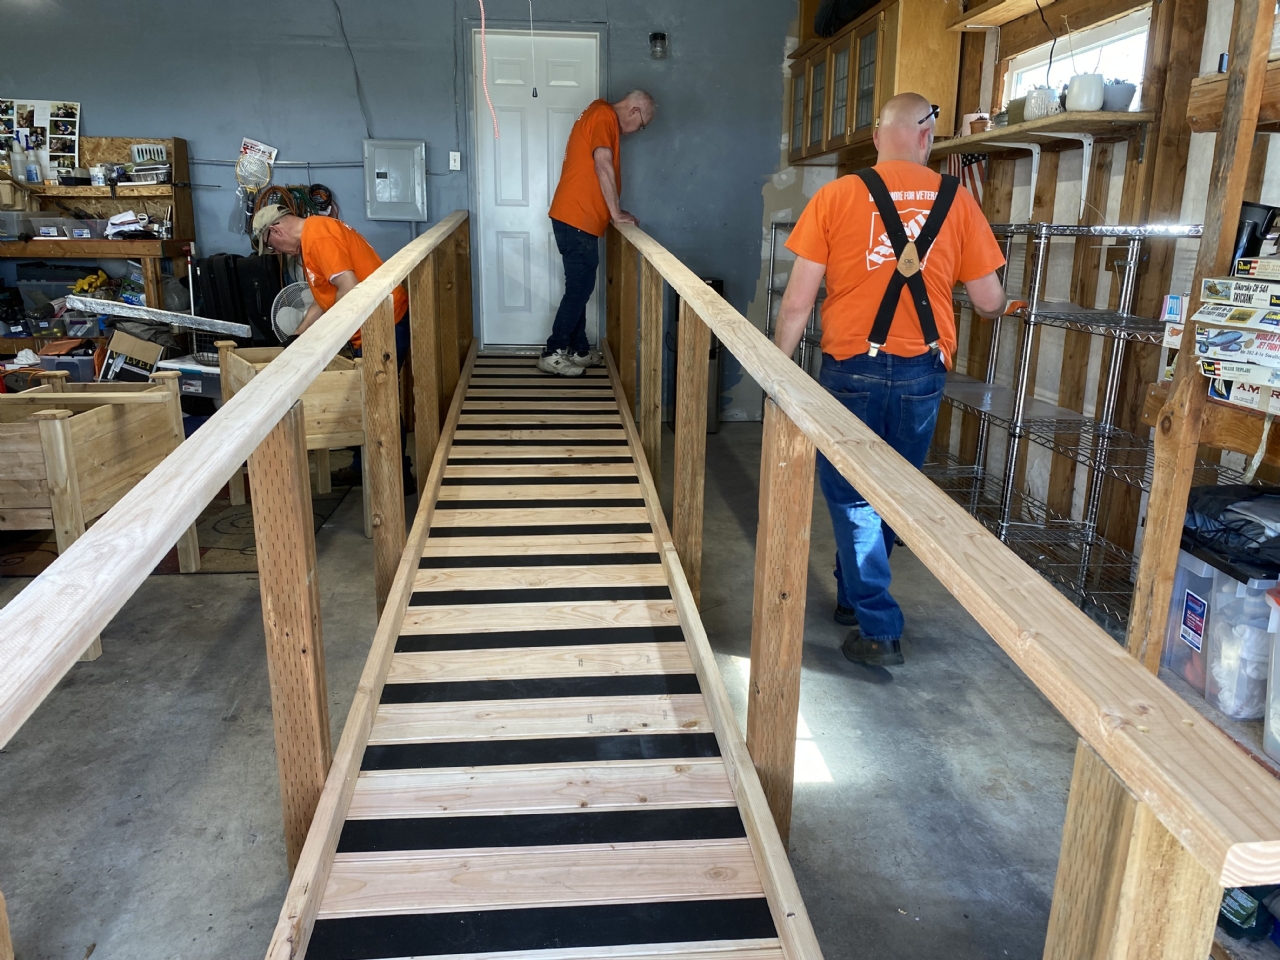 Home Depot partners with VFW post 10580 to build ramp for local Veteran.